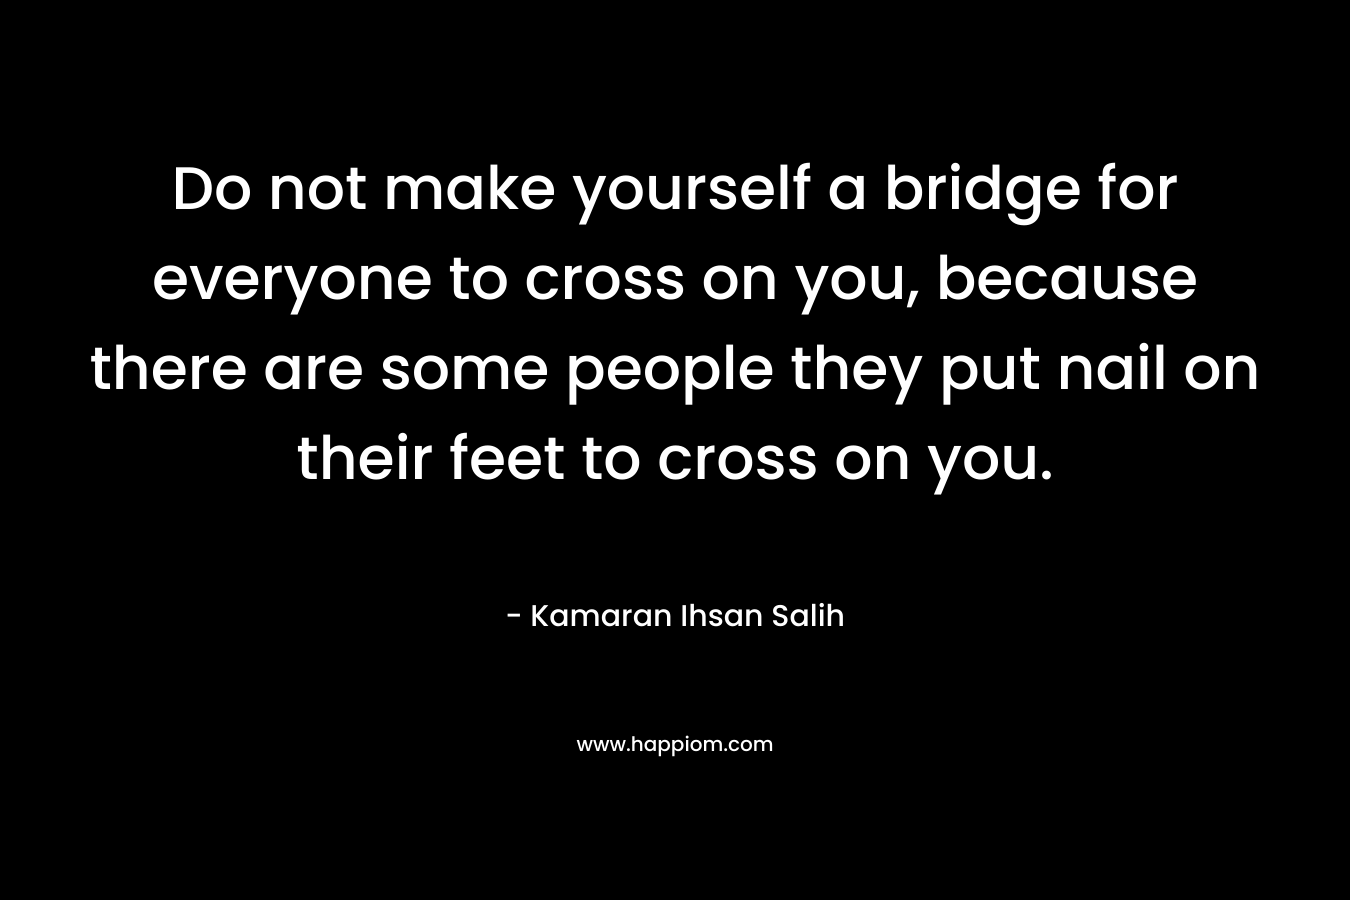 Do not make yourself a bridge for everyone to cross on you, because there are some people they put nail on their feet to cross on you.